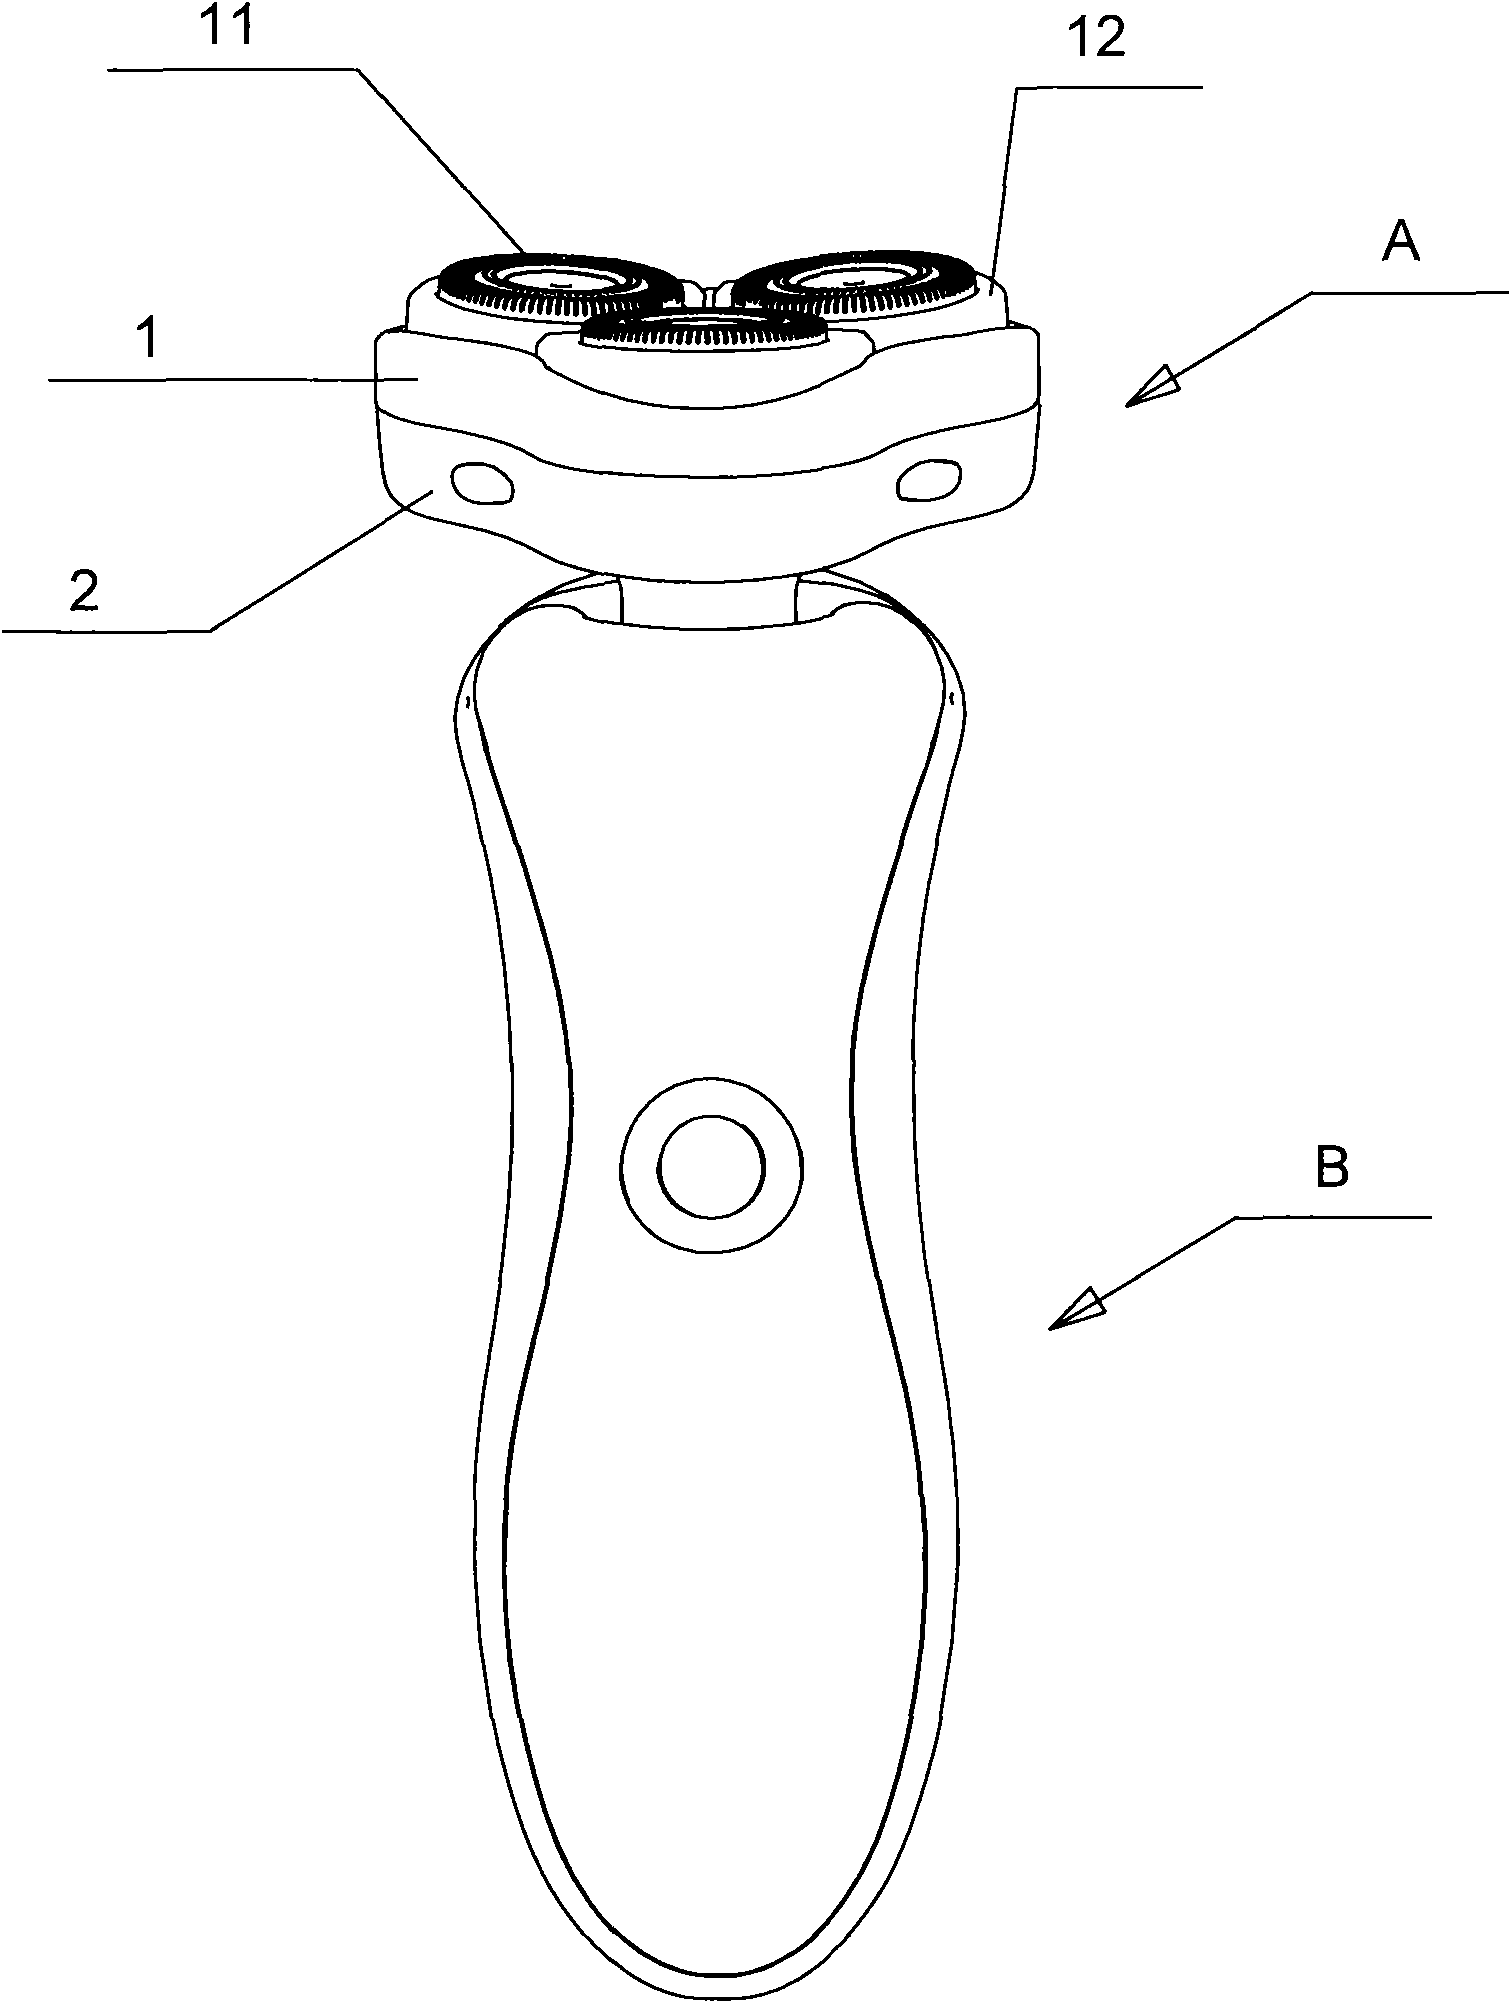 Rotary type shaver with head part capable of omnidirectionally floating